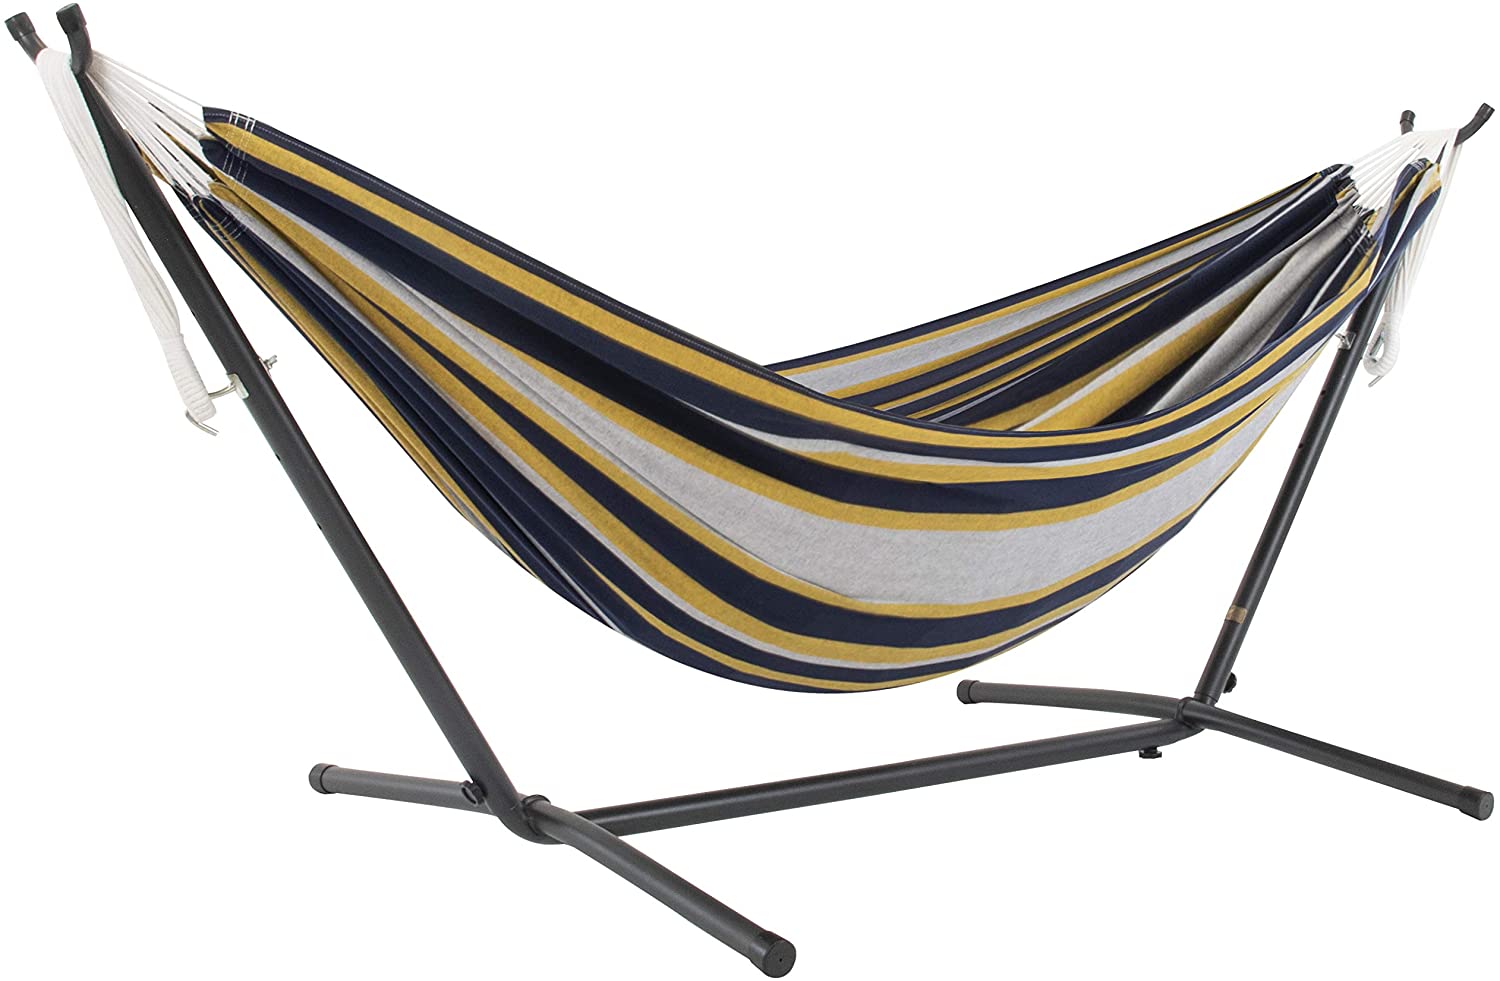 9' Vivere Double Hammock w/ Stand Combo (serenity; cotton) $56 + Free Shipping